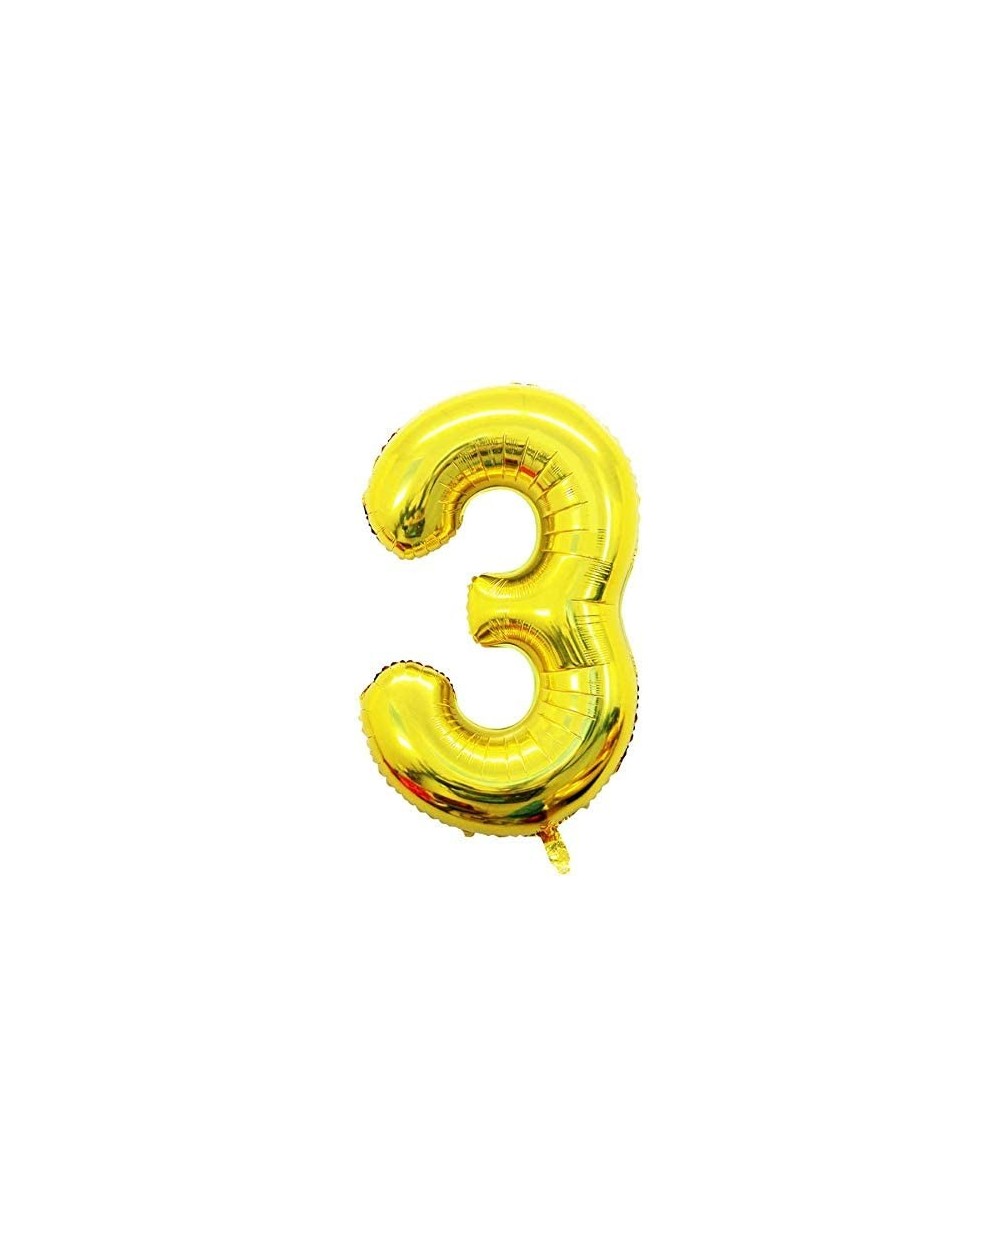 Balloons 2 Pcs 40 Inch Number 3 Gold Foil Balloons- Birthday Party Decorations Supplies Helium Foil Mylar Digital Balloons.(2...